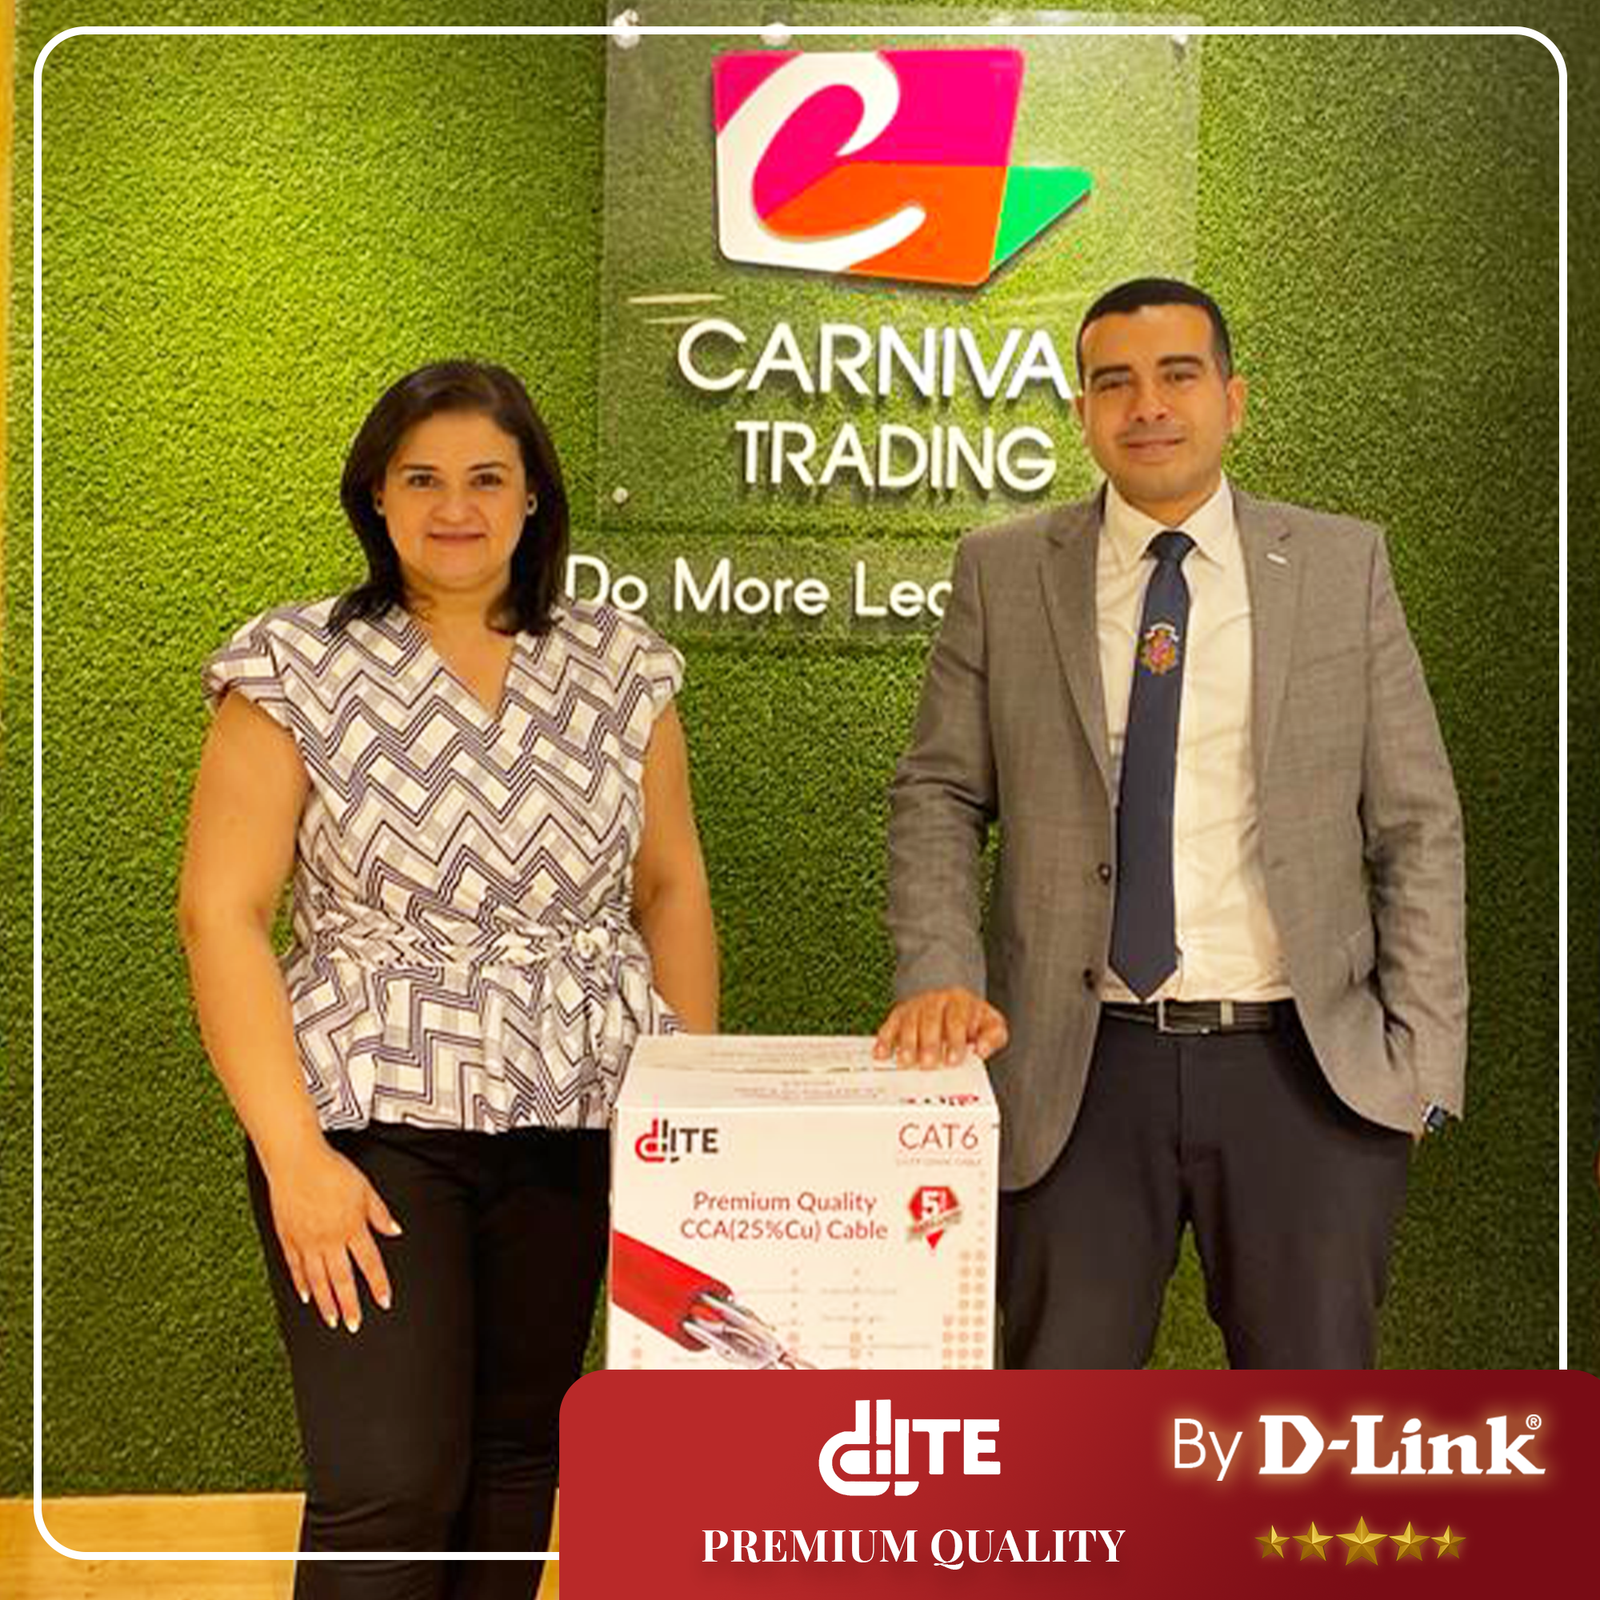 Carnival Trading D-Link DLite Cables